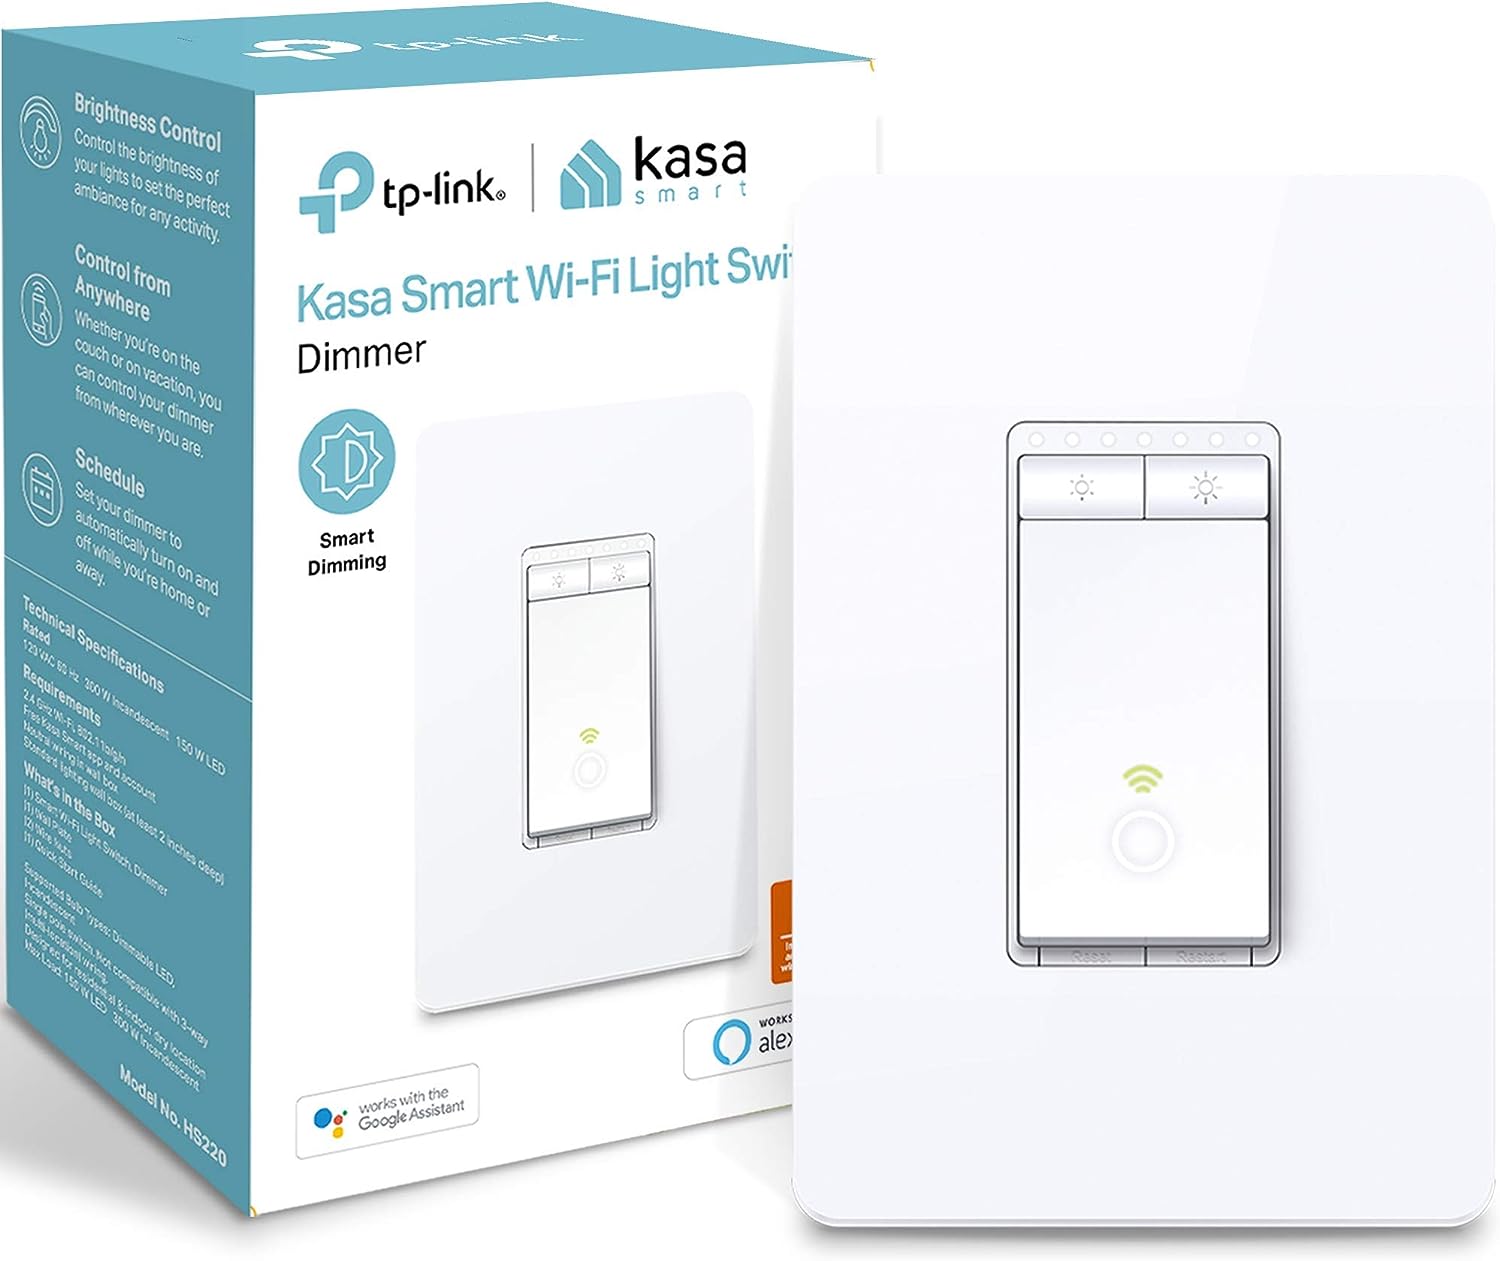 TP-Link Kasa HS220 Smart Dimmer Switch $15 and HS220P3 (3-pack) $45 Amazon